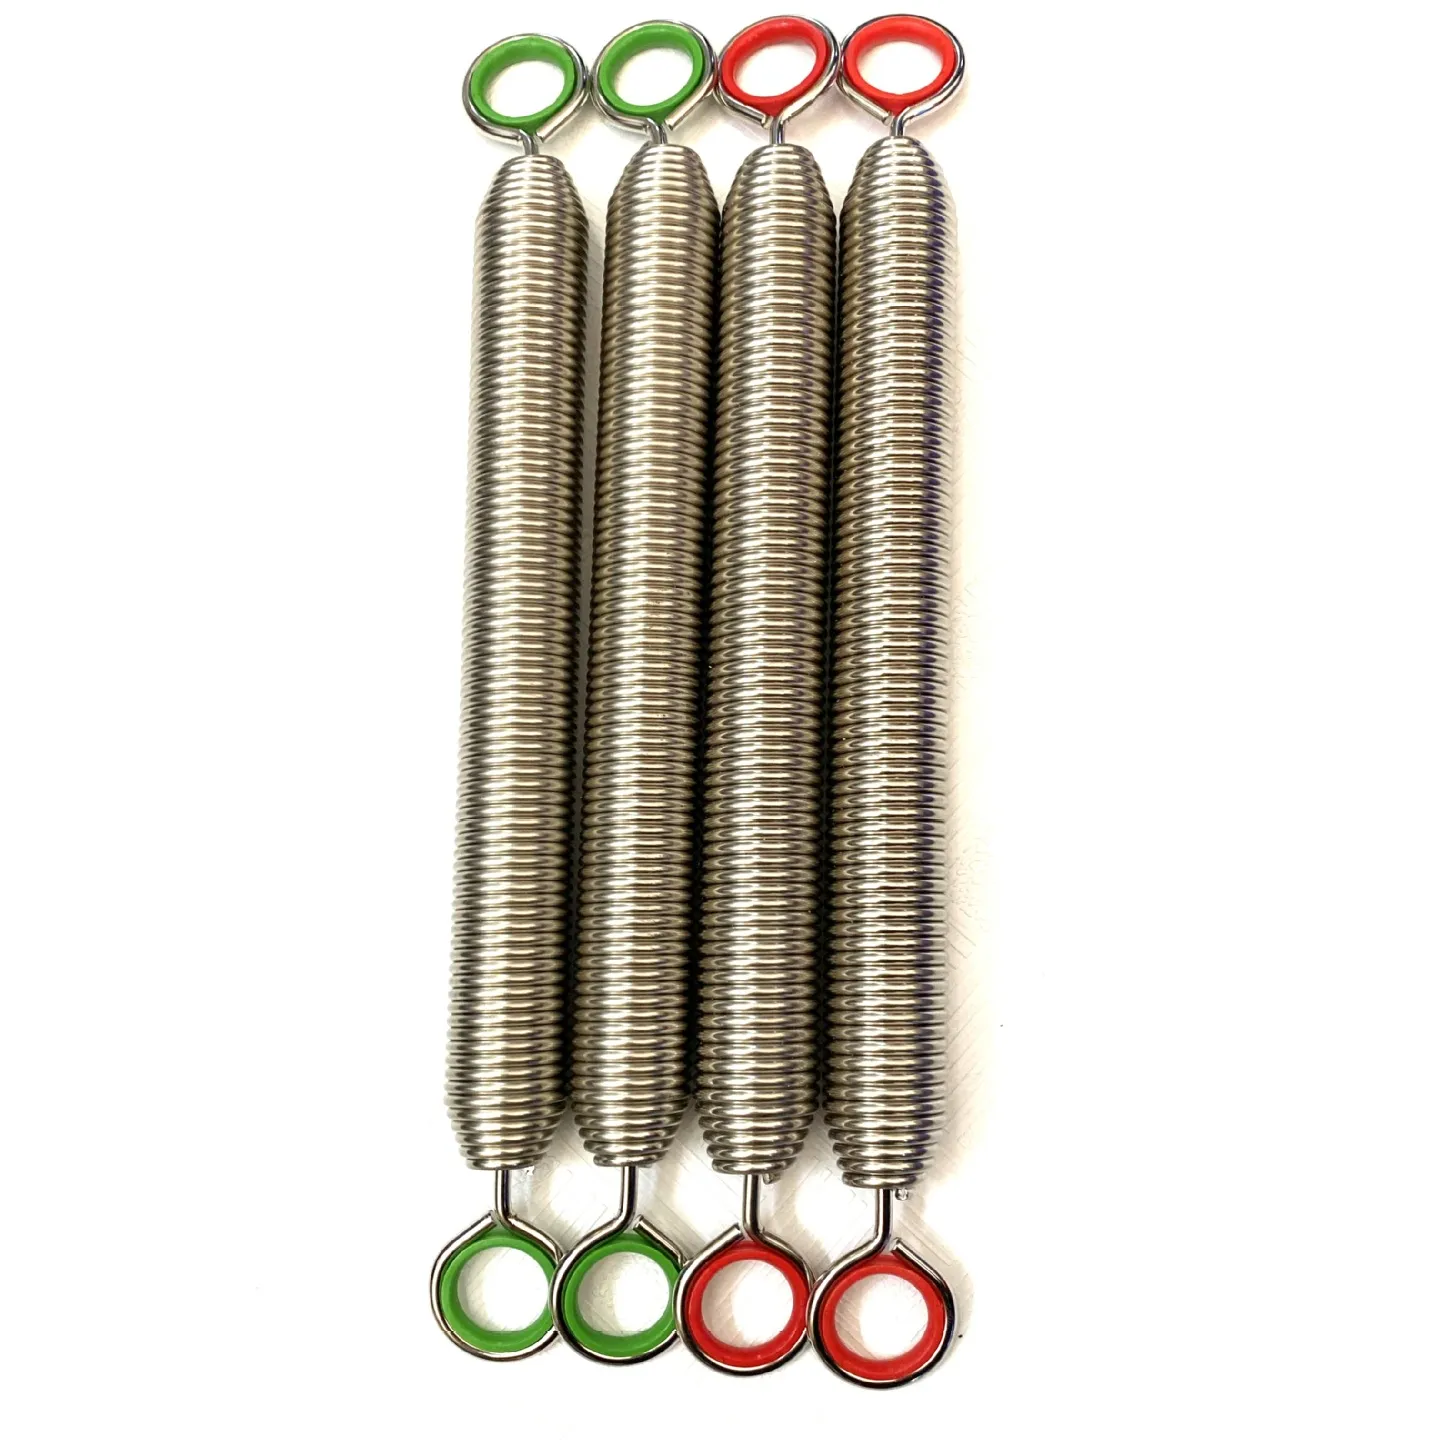 OEM high pulling force Pilates Pro Chair Spring Reformer Sports Tension Springs